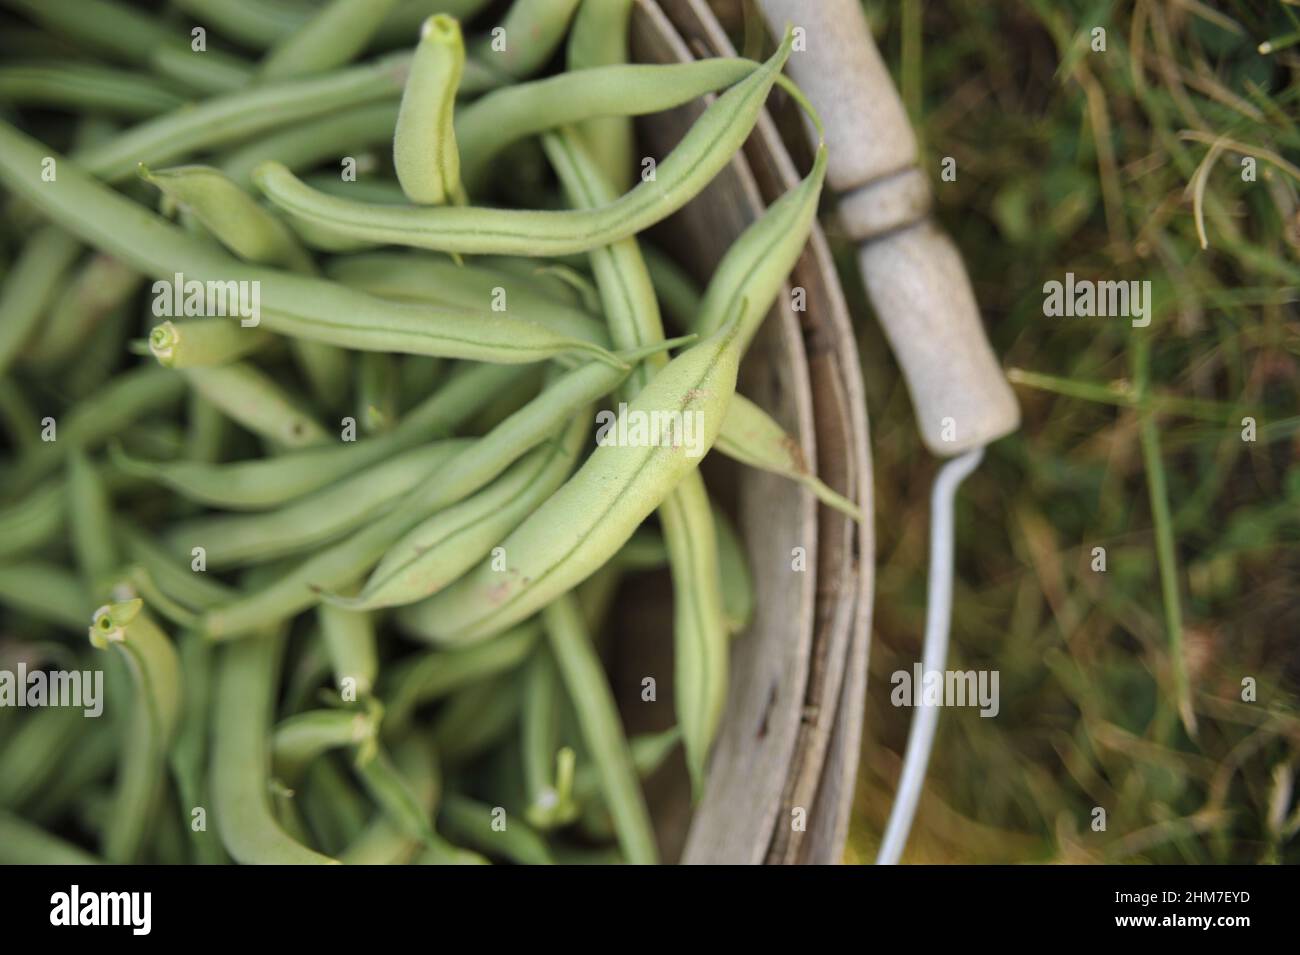 Close-up top view of freshly picked green beans in a bucket in the garden Stock Photo